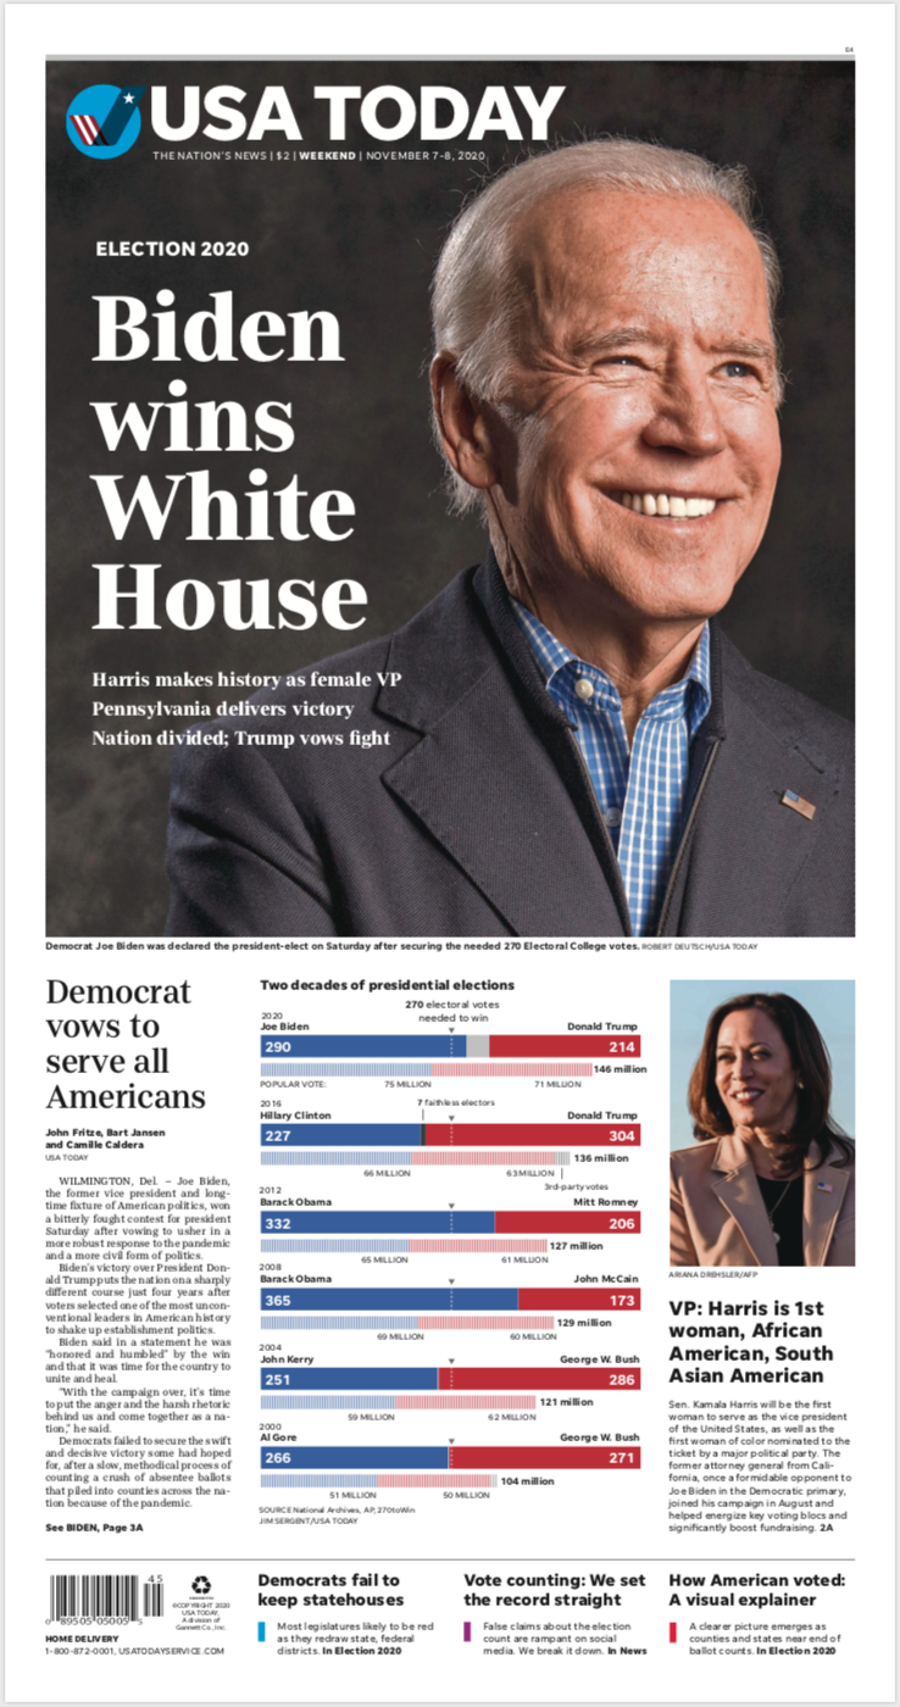 President-elect Joe Biden is featured in USA TODAY's special print edition, Saturday, Nov. 7, after the election.